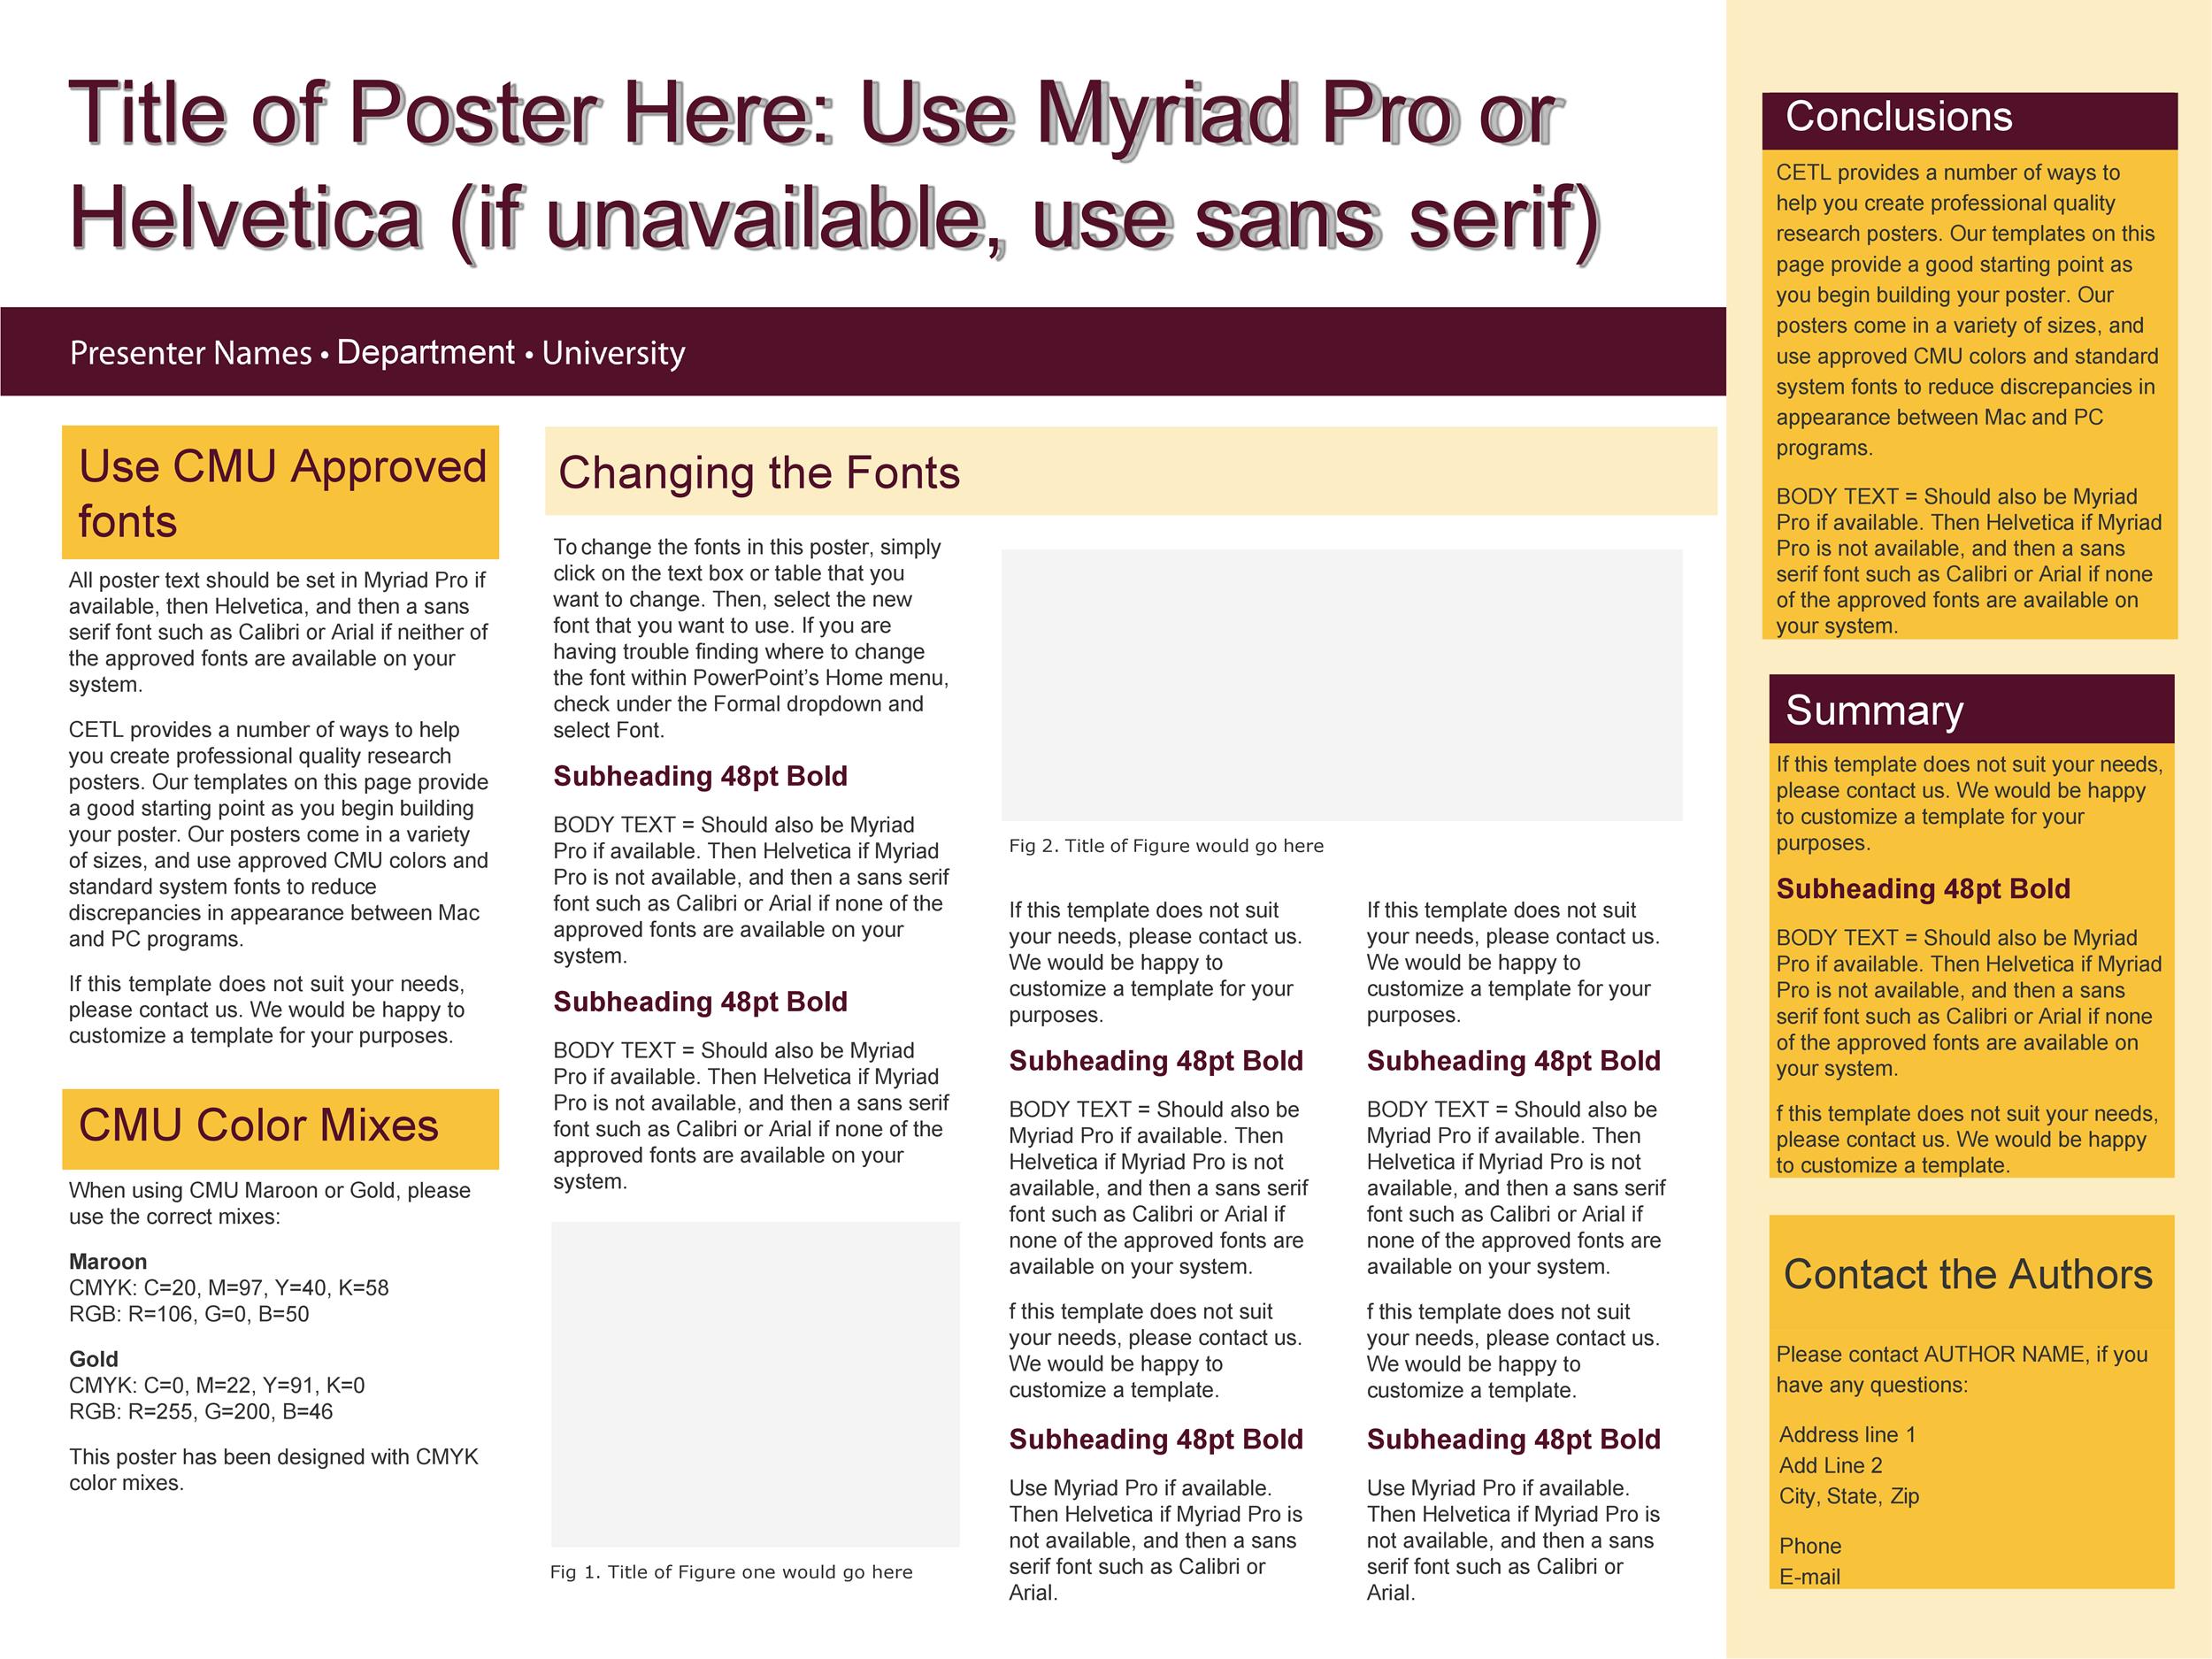 Free research poster template 33